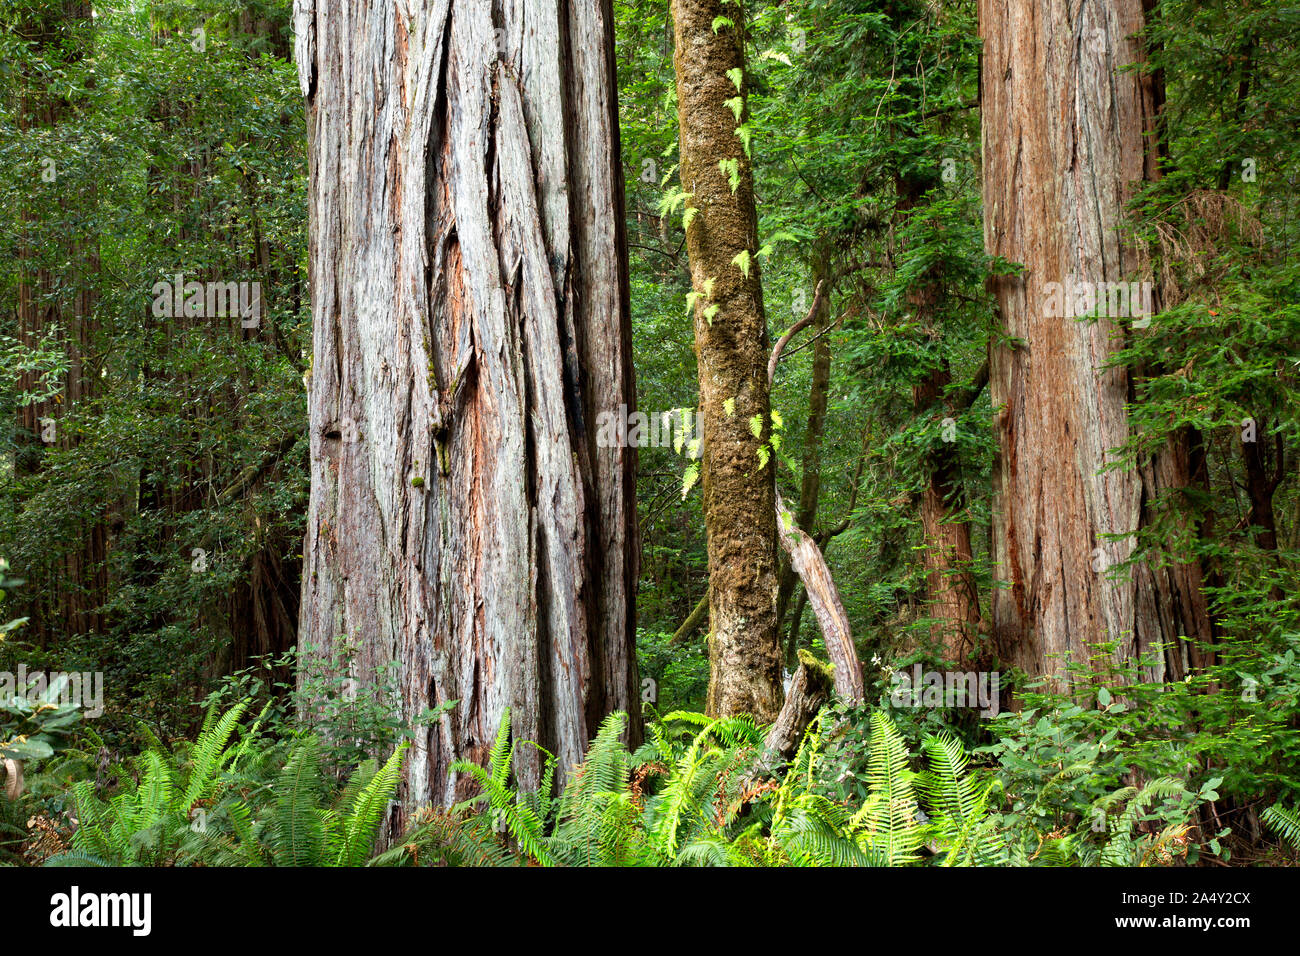 CA03715-00...CALIFORNIA - Massive redwood trees in the Tall Trees Grove of Redwoods National Park. Stock Photo